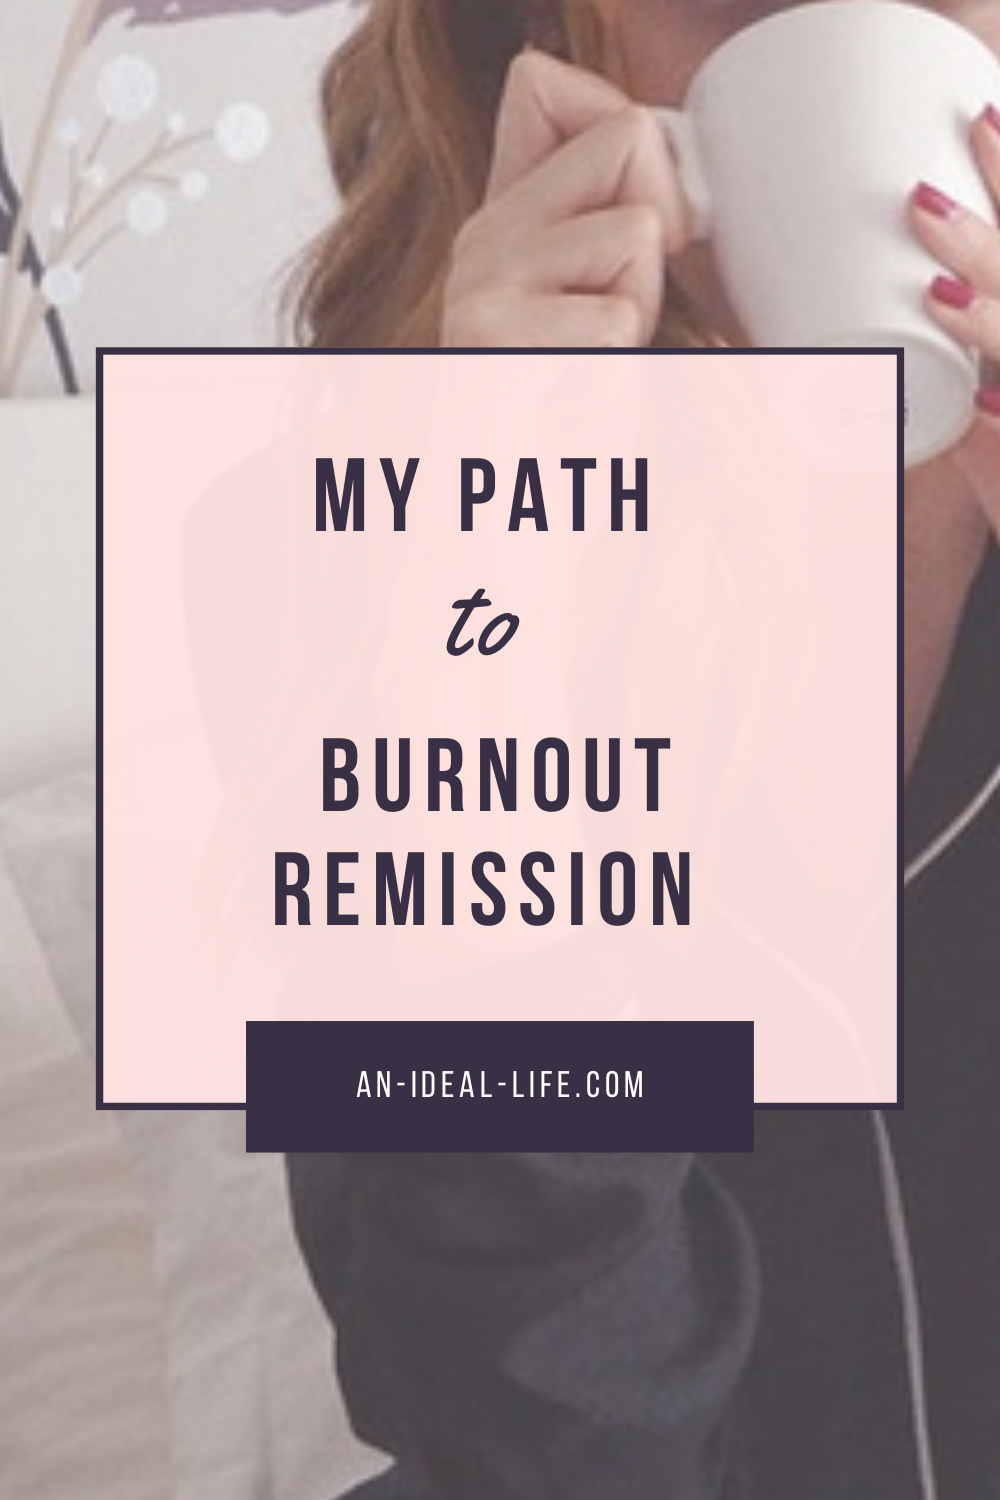 My Path to Burnout Remission